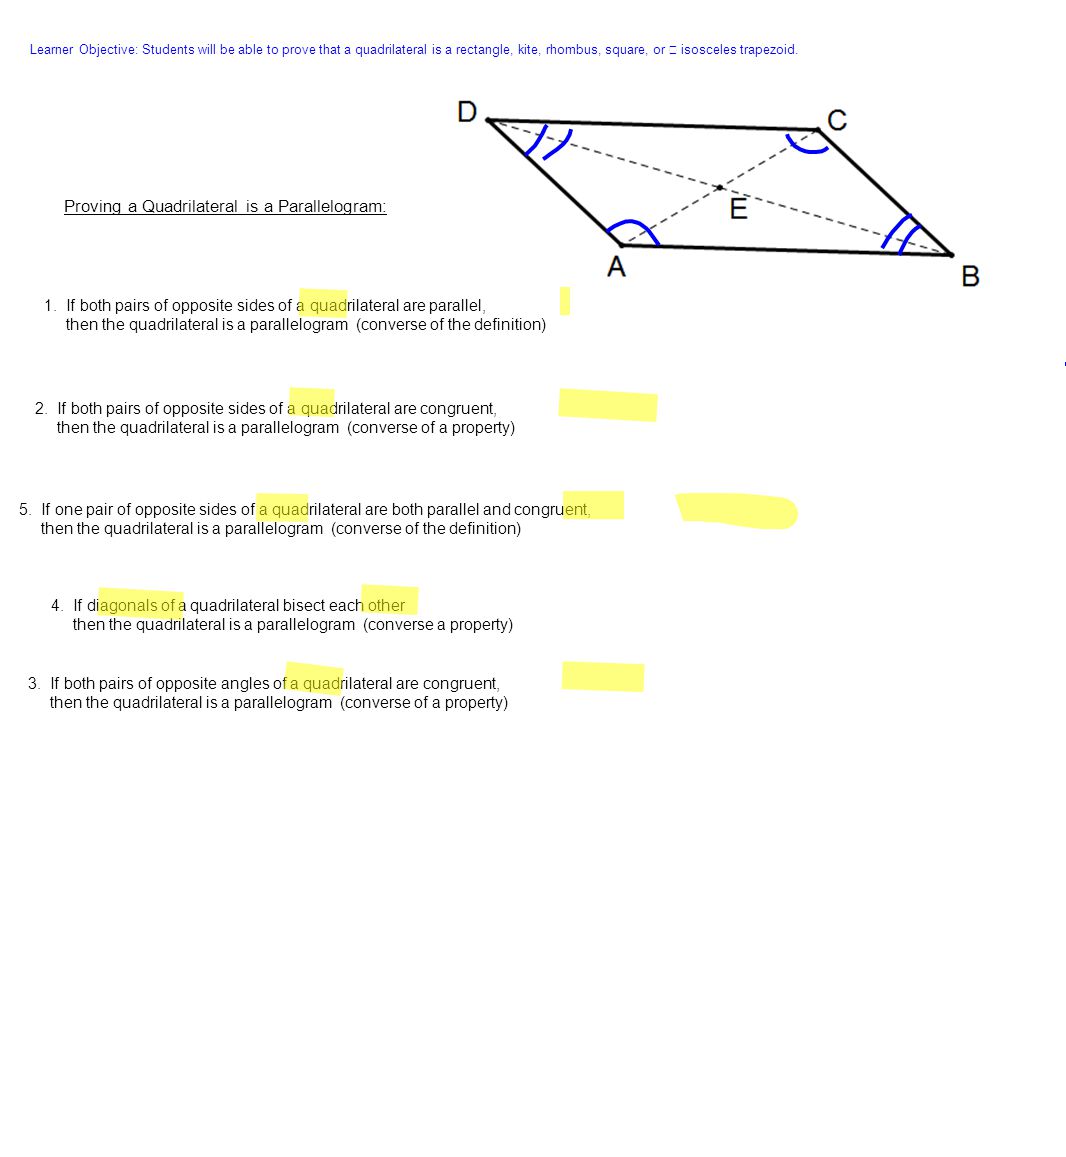 Proving a Quadrilateral is a Parallelogram: